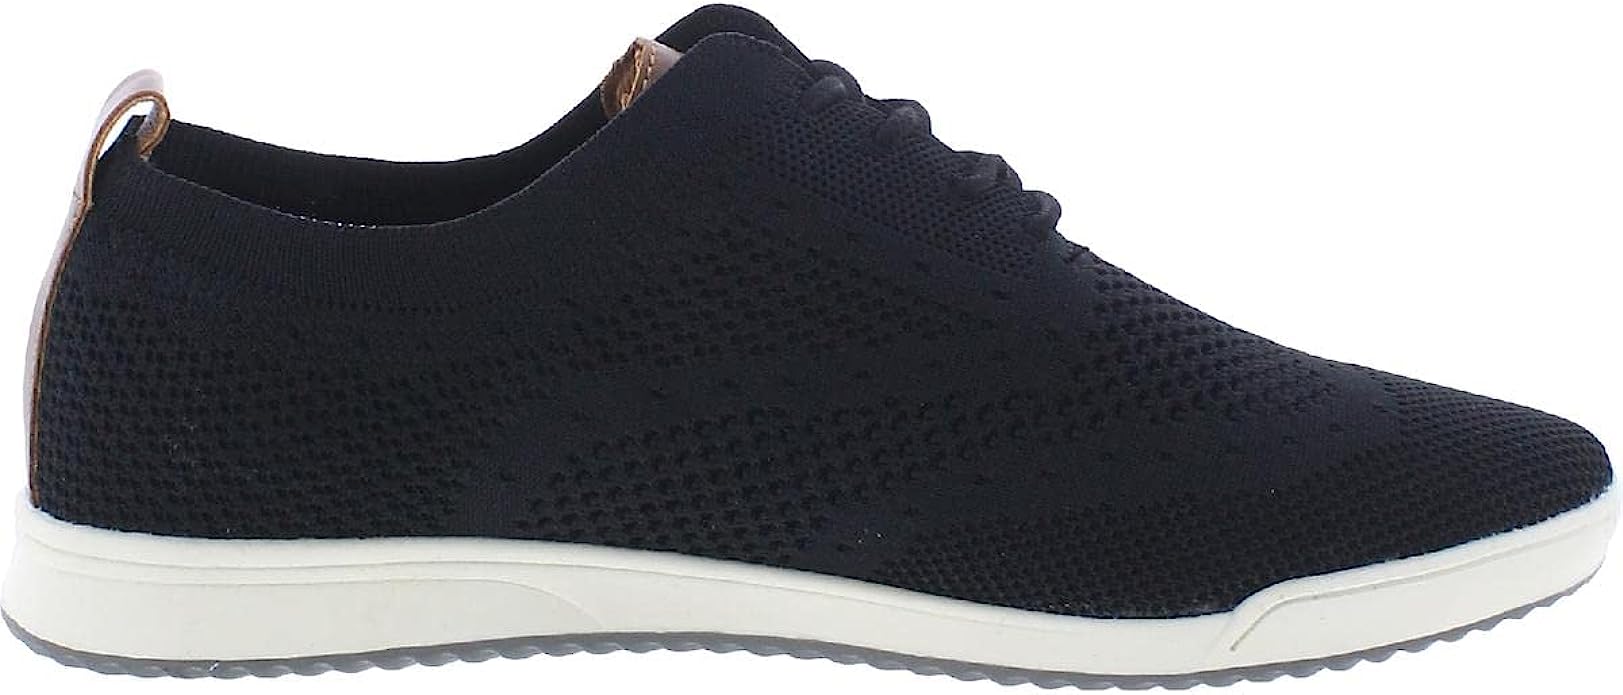 IZOD Mens Lace Up Breeze Knitted Memory Foam Shoes